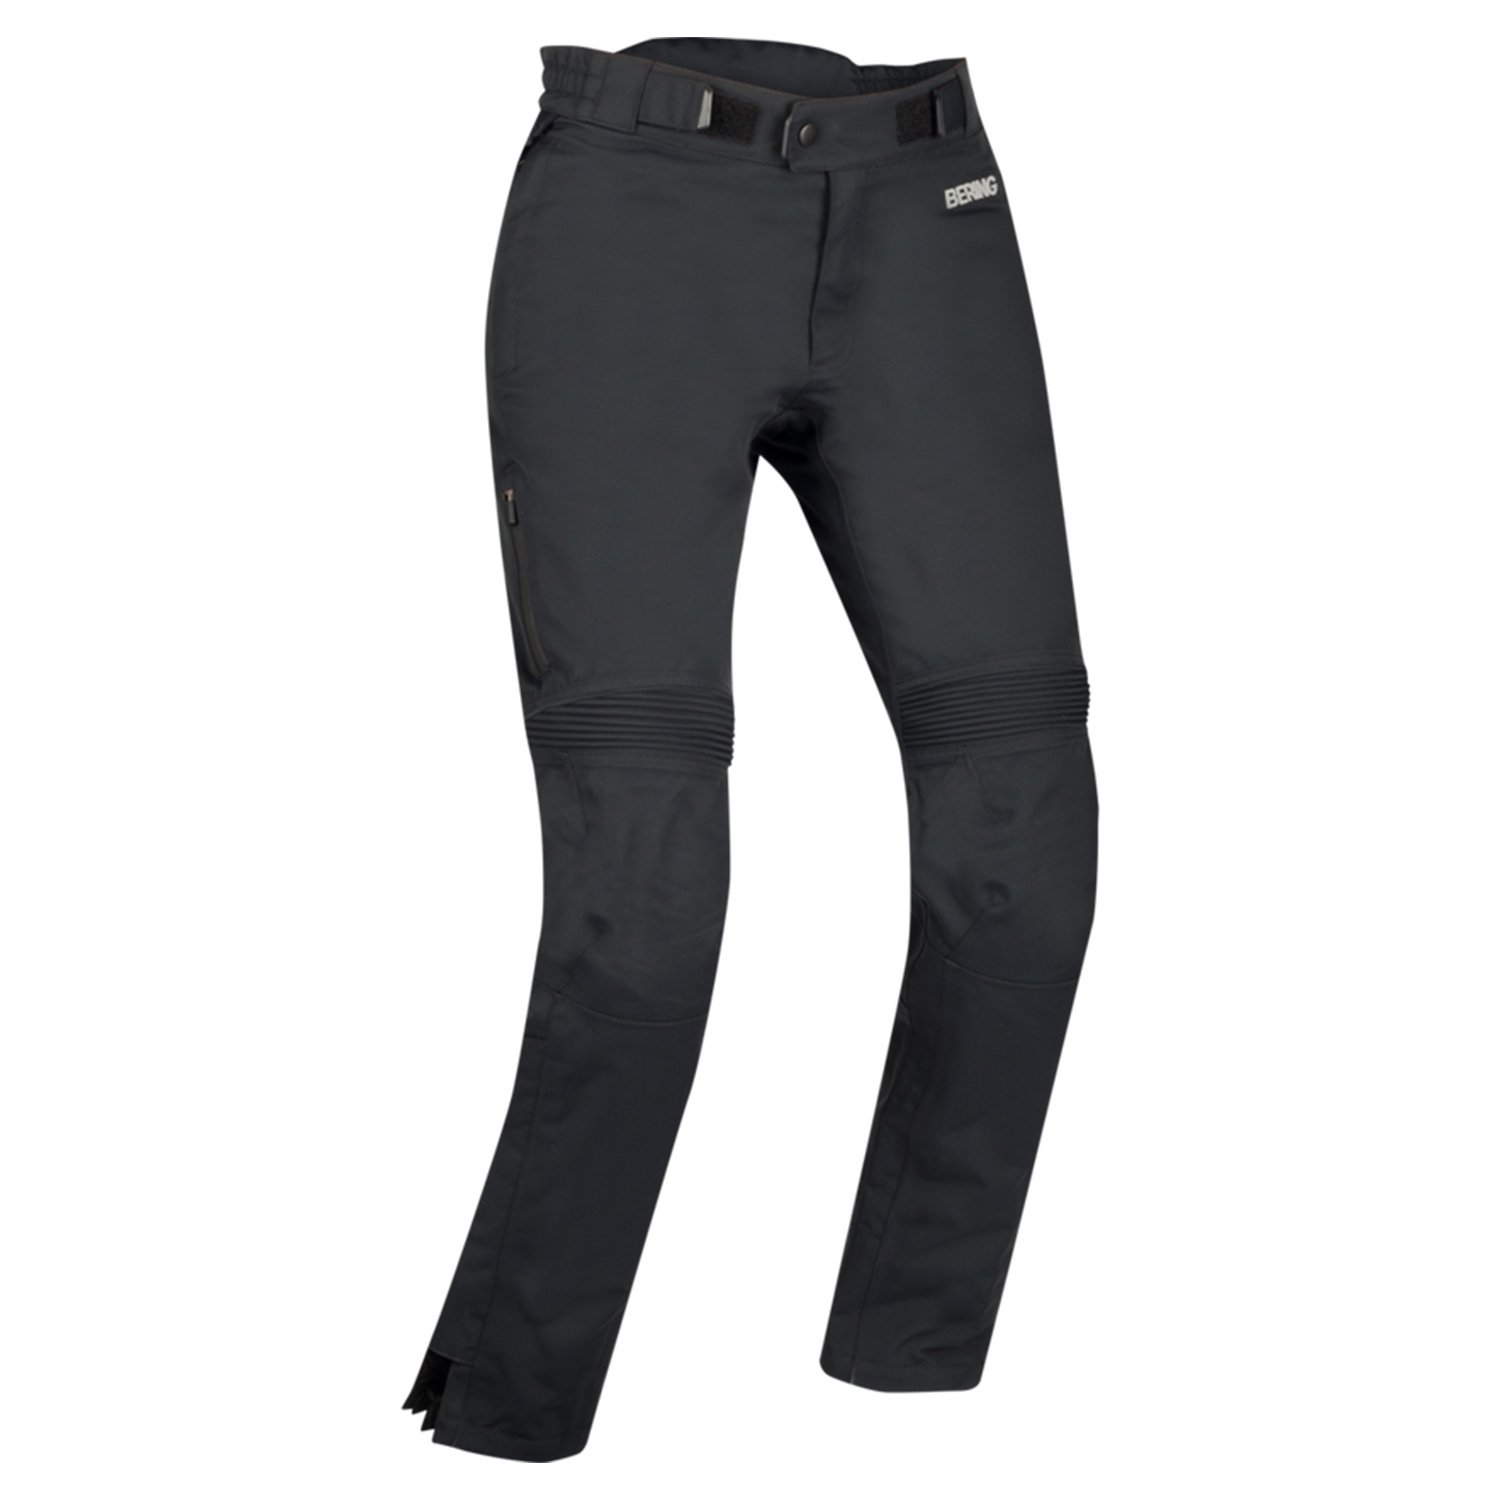 Image of Bering Lady Zephyr Trousers Black Size T3 ID 3660815180884